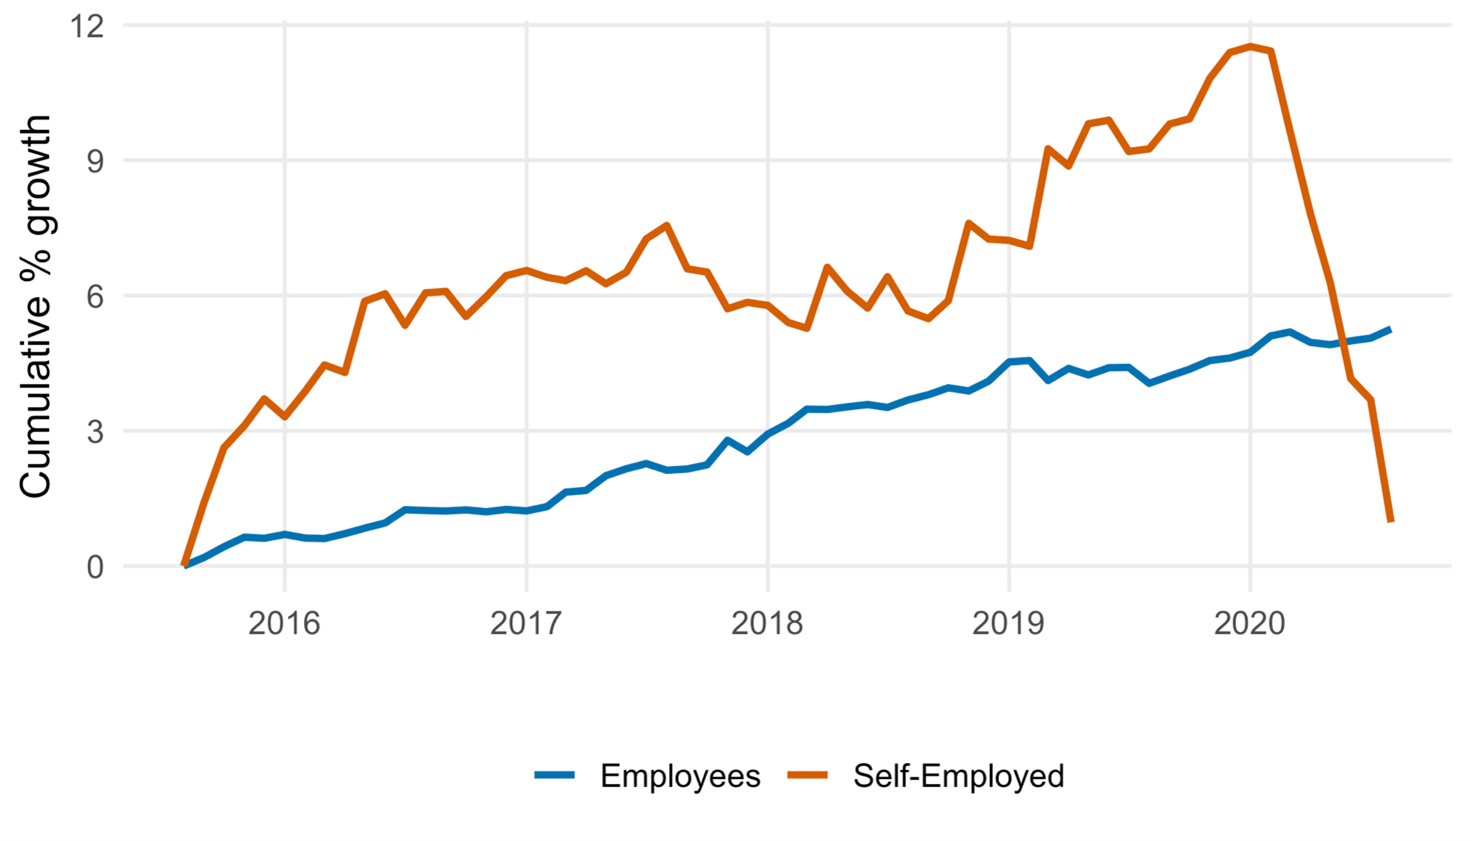 Figure showing employee and self-employment growth